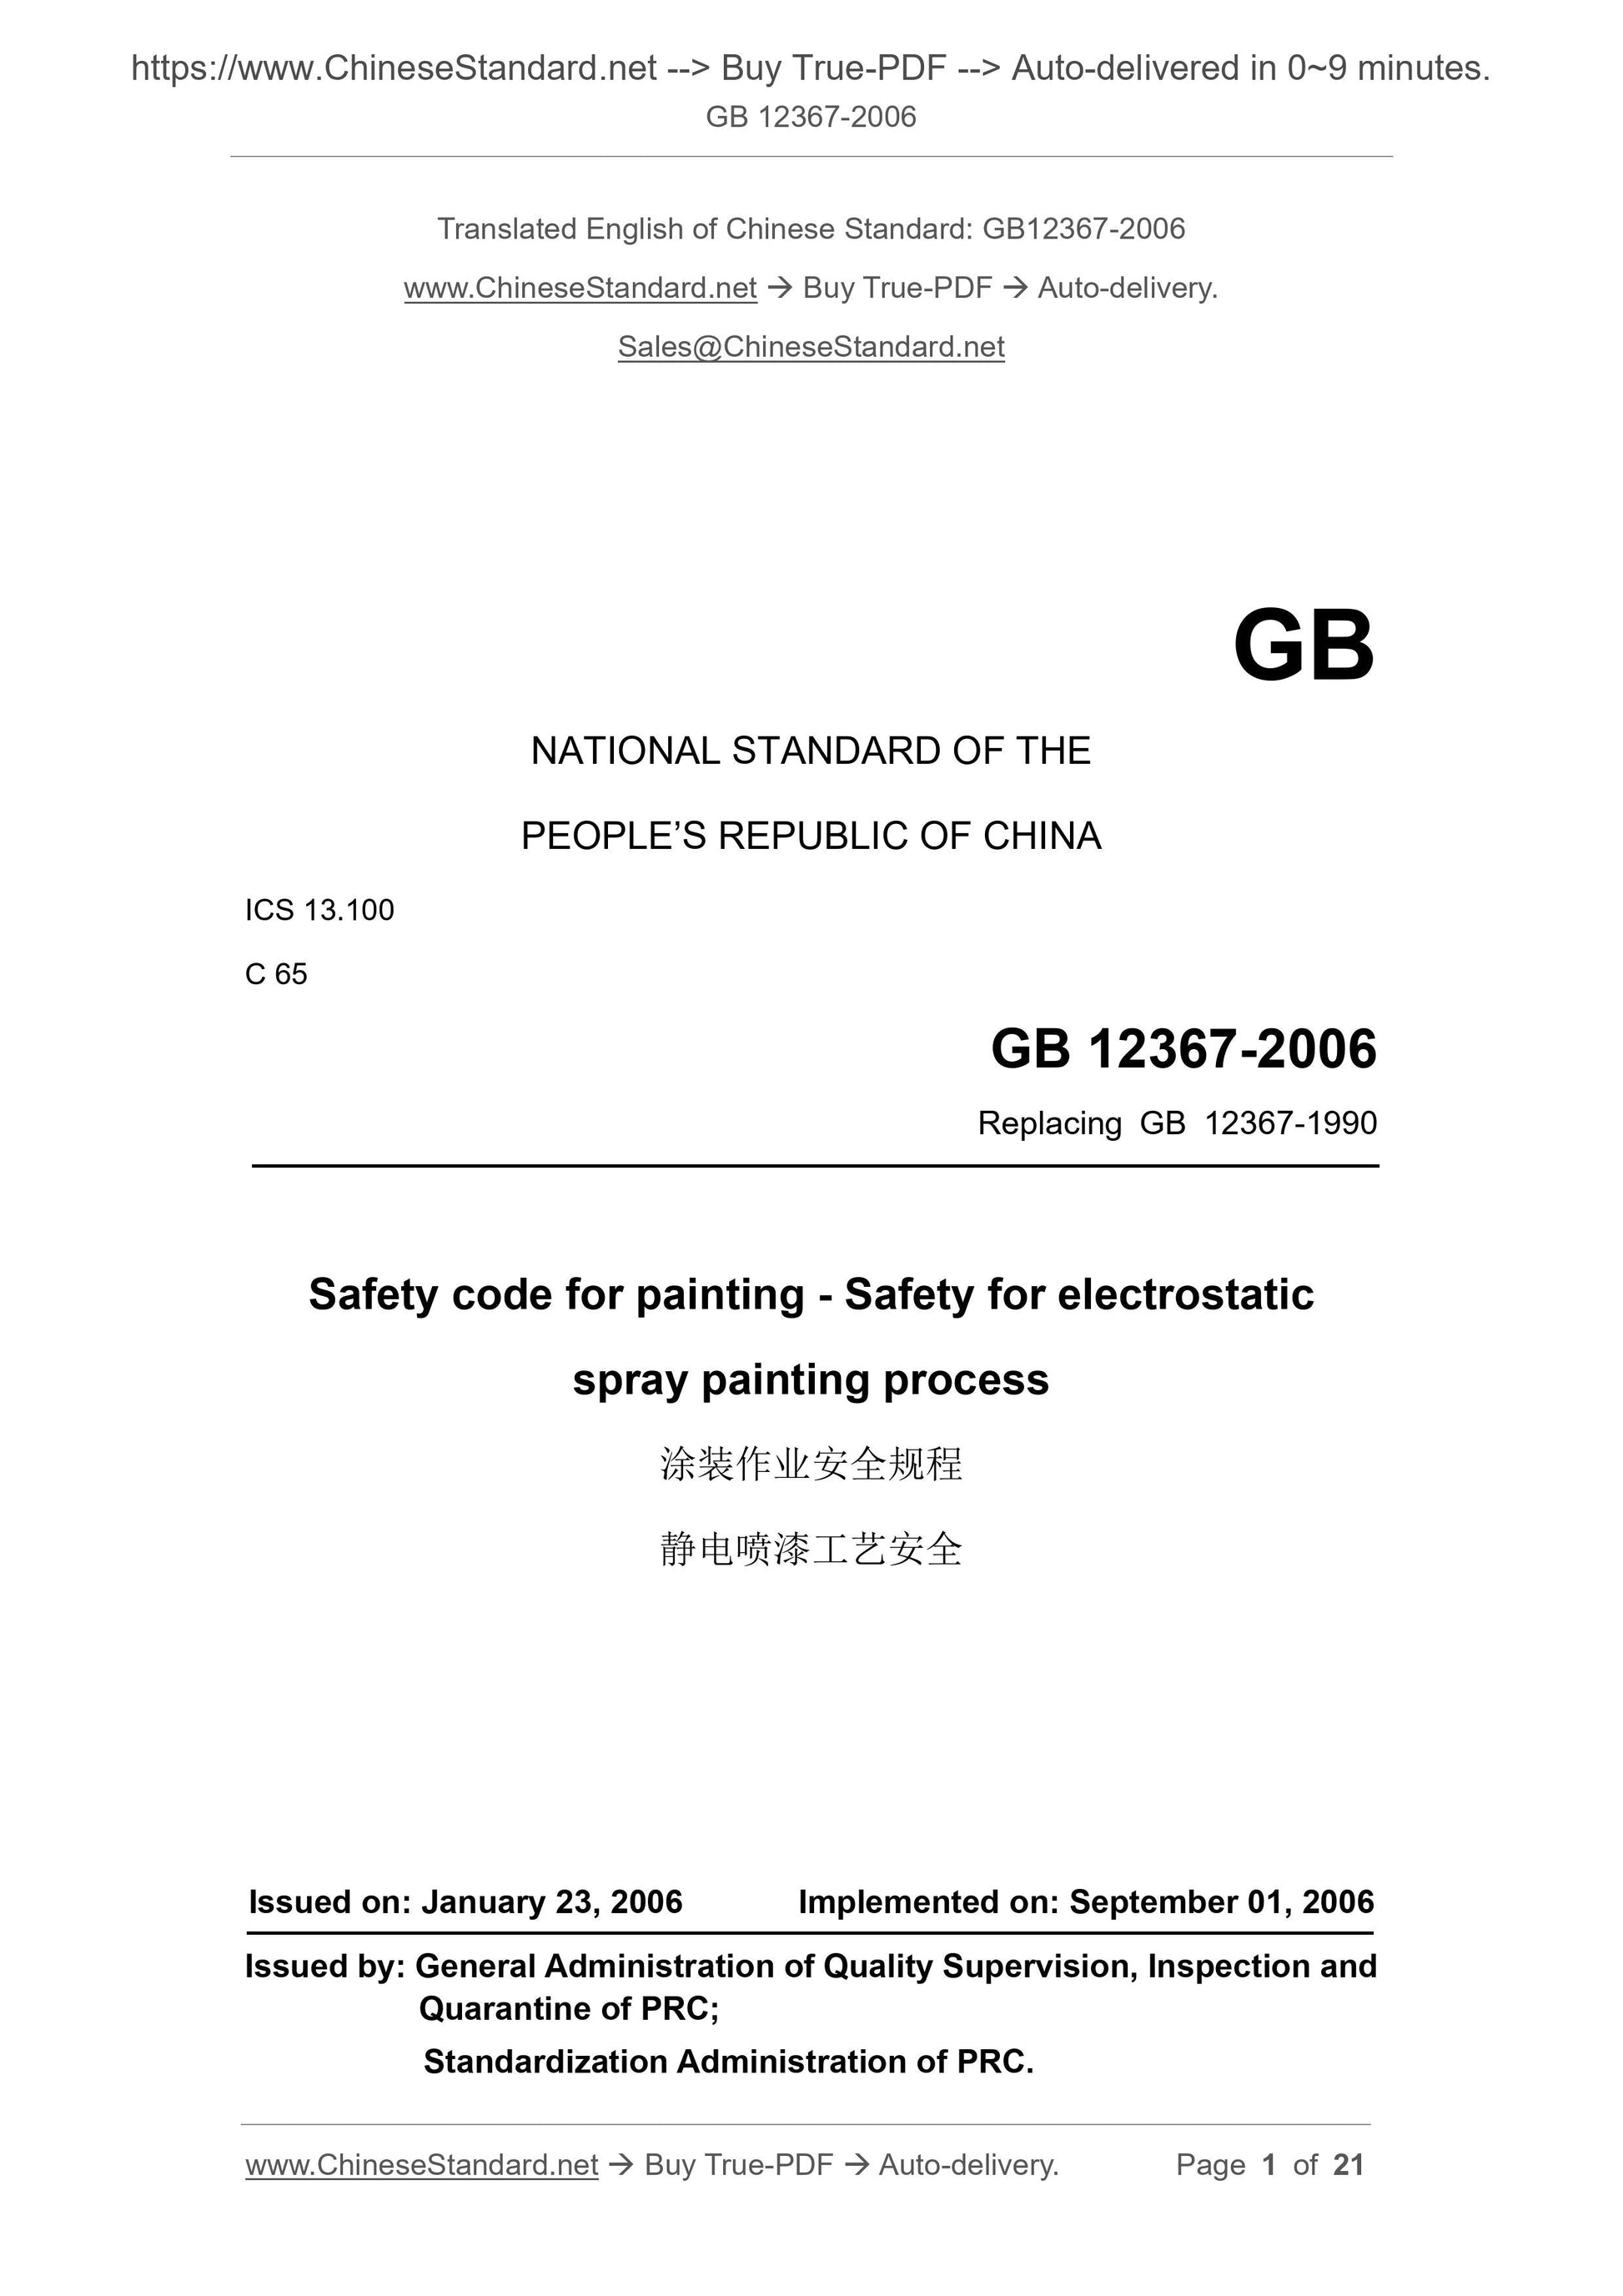 GB 12367-2006 Page 1